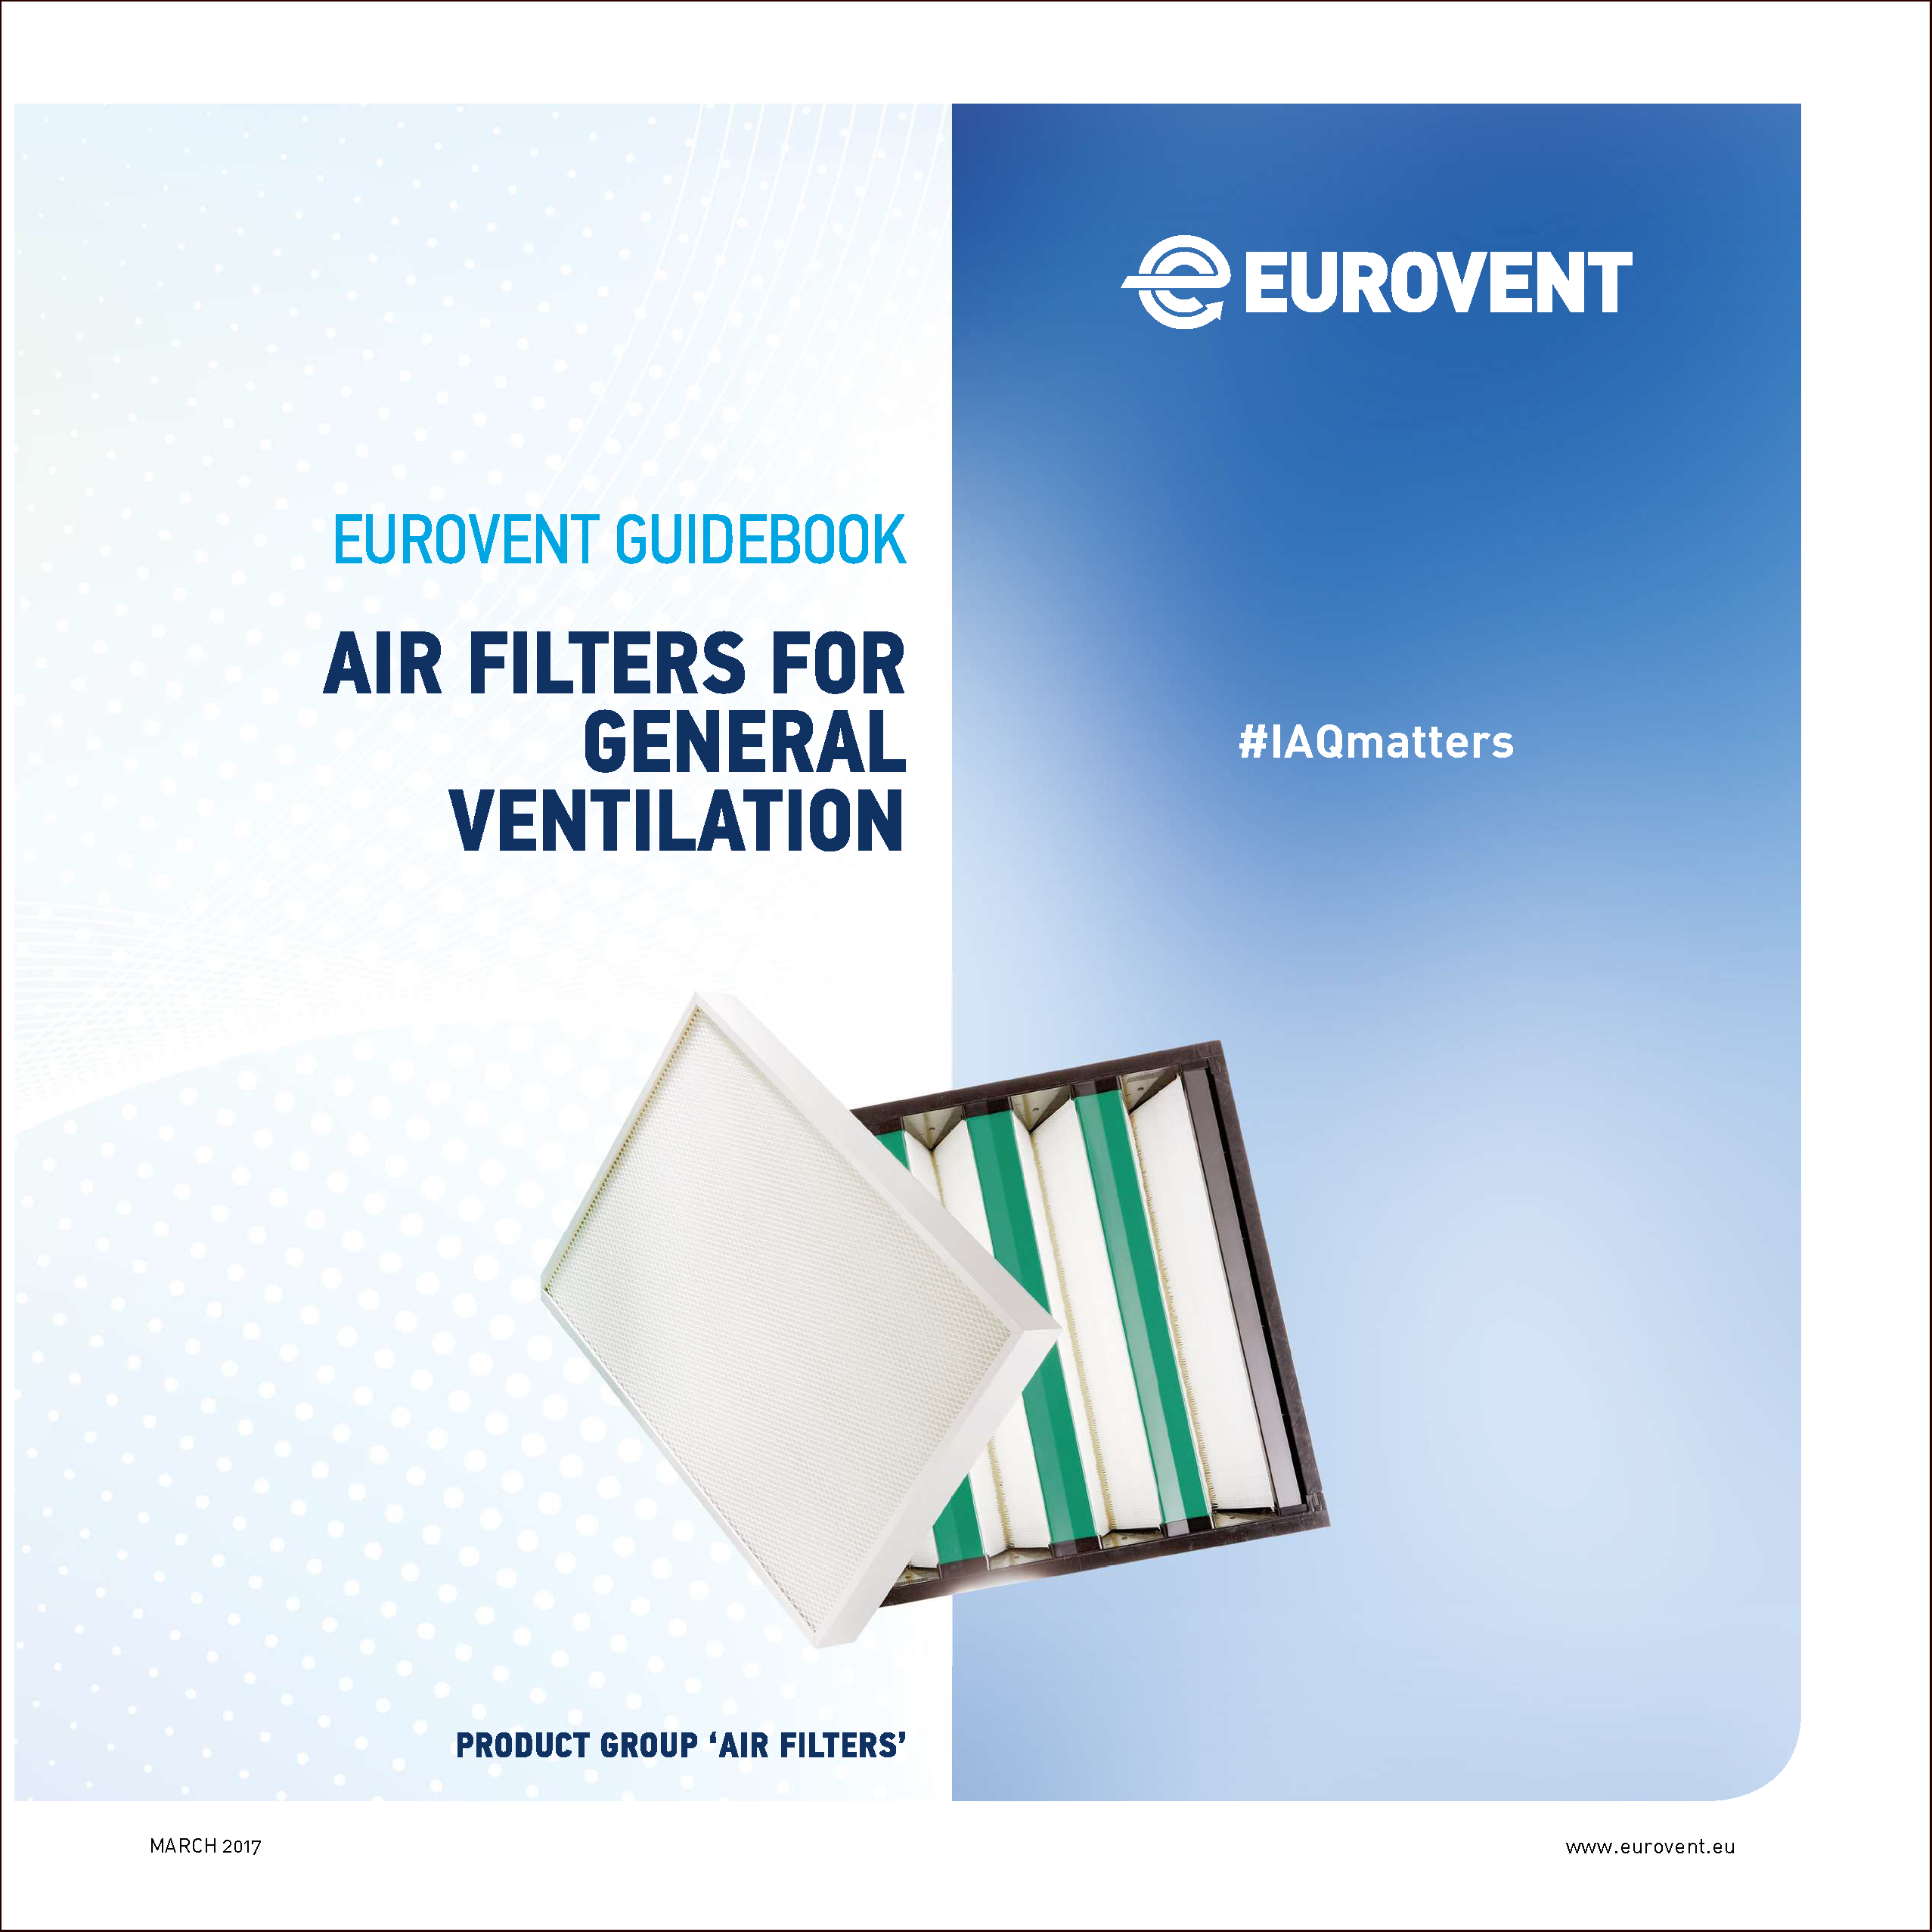 Eurovent Air Filter Guidebook - First edition